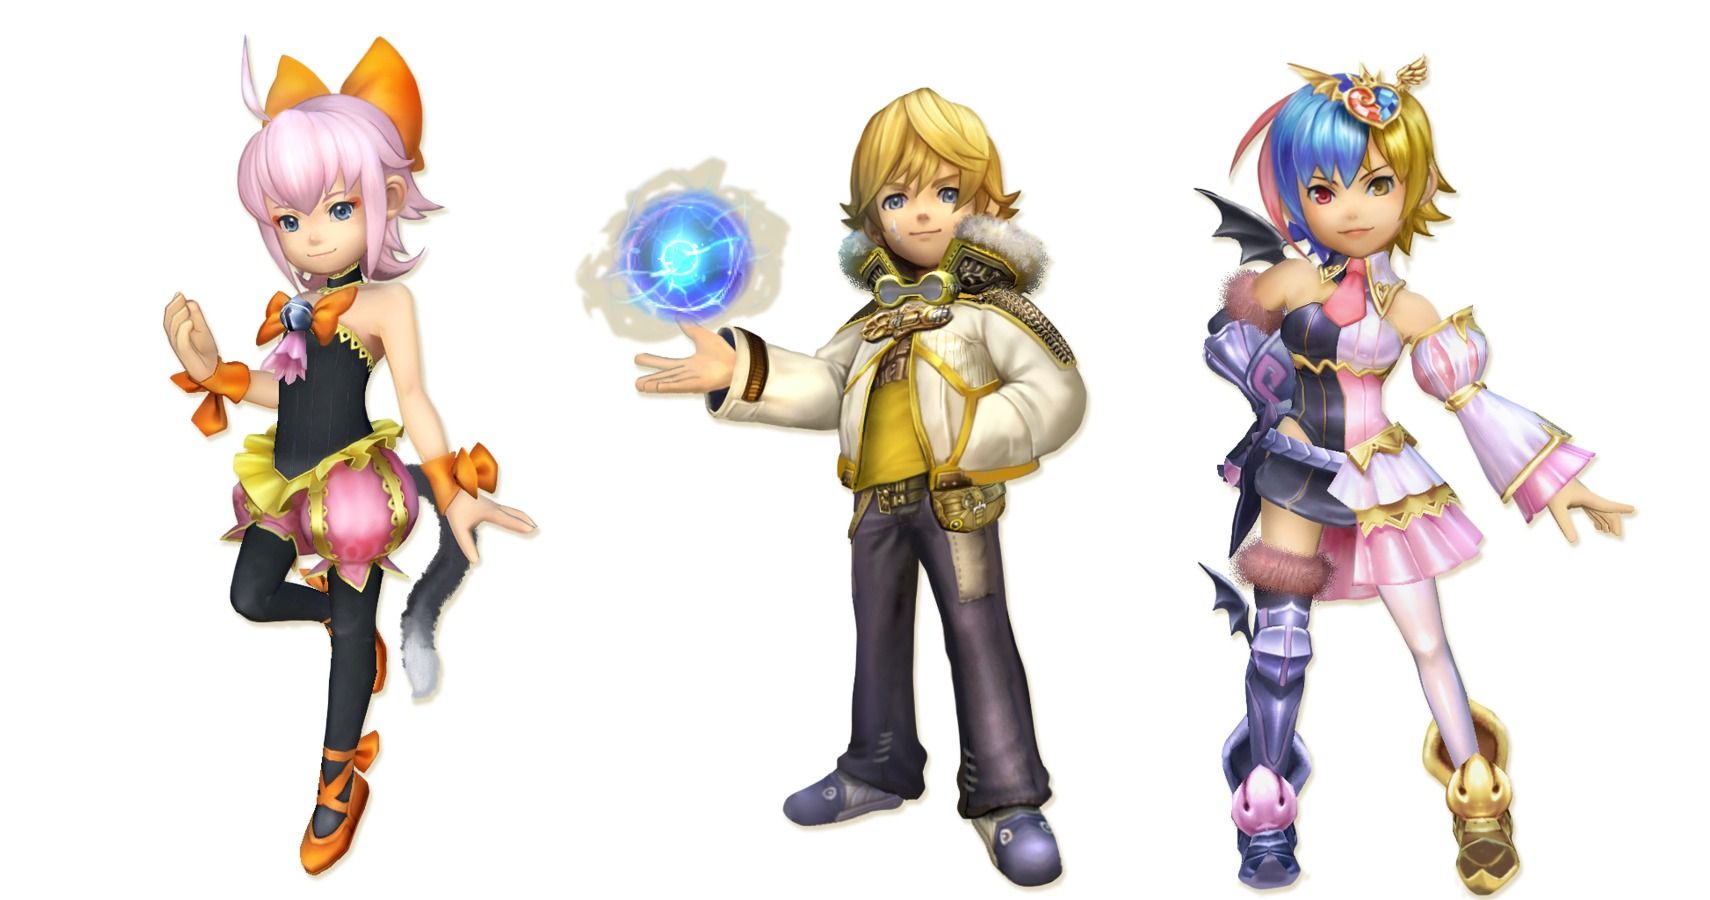 Final Fantasy Crystal Chronicles Remastered Edition Will Have Character & Weapon DLC